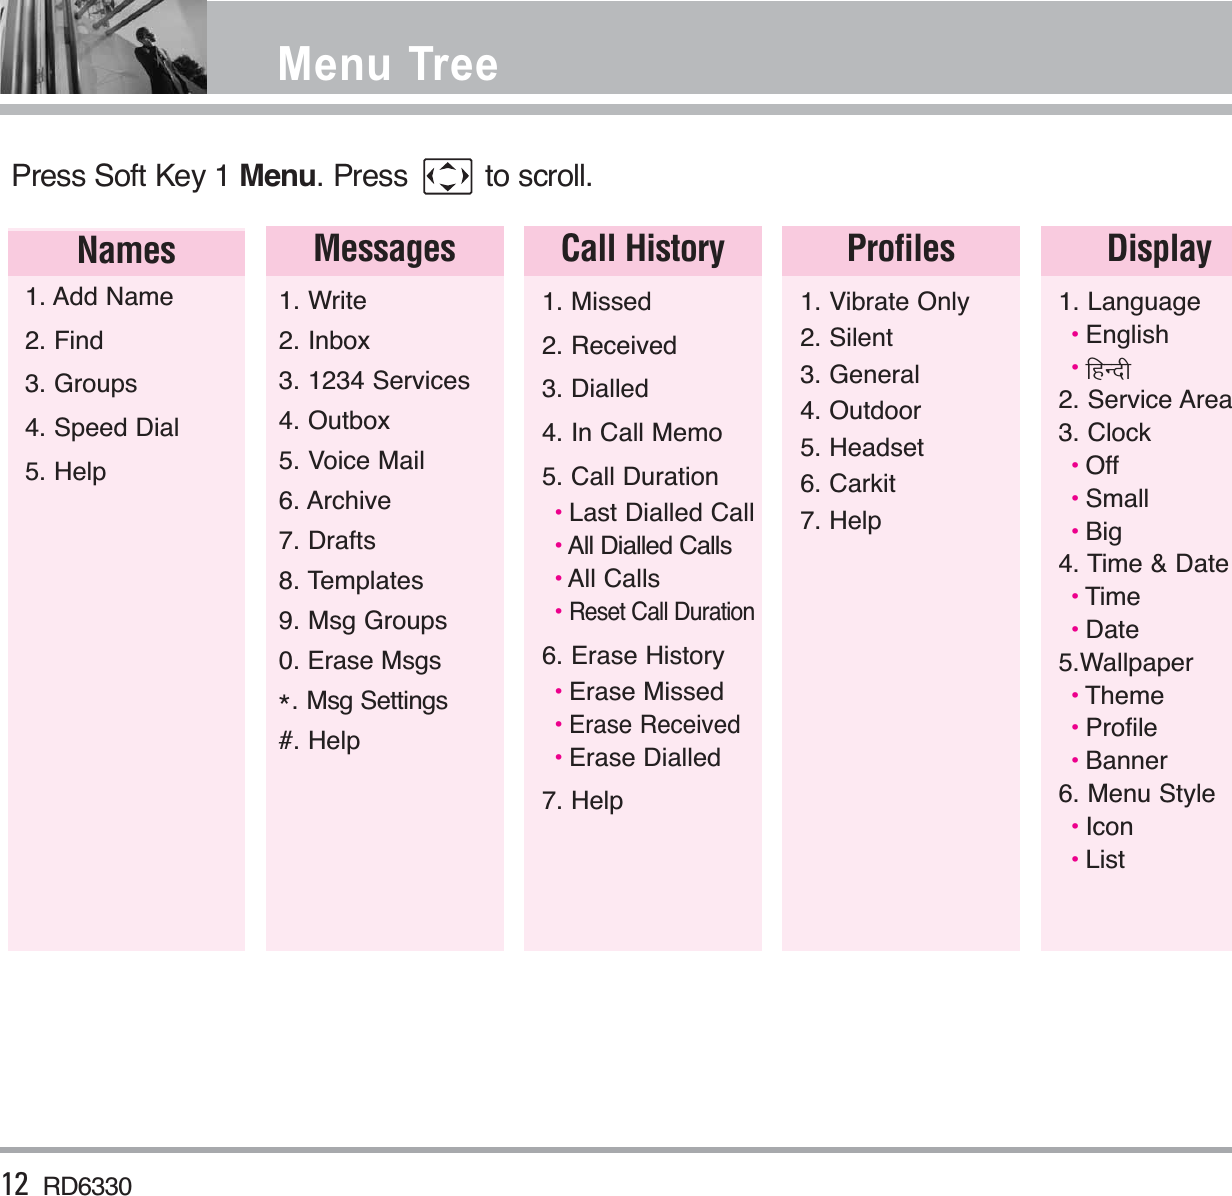 Press Soft Key 1 Menu. Press  to scroll. Names Messages Call History1. Add Name2. Find3. Groups4. Speed Dial5. Help1. Write2. Inbox3. 1234 Services4. Outbox5. Voice Mail6. Archive7. Drafts8. Templates9. Msg Groups0. Erase Msgs*. Msg Settings#. Help1. Missed2. Received3. Dialled4. In Call Memo5. Call Duration•Last Dialled Call•All Dialled Calls•All Calls•Reset Call Duration6. Erase History•Erase Missed•Erase Received•Erase Dialled7. HelpProfiles1. Vibrate Only2. Silent3. General4. Outdoor5. Headset6. Carkit7. HelpDisplay1. Language•English•fgUnh2. Service Area3. Clock•Off•Small•Big4. Time &amp; Date•Time•Date5.Wallpaper•Theme•Profile•Banner6. Menu Style•Icon•List12 RD6330Menu Tree